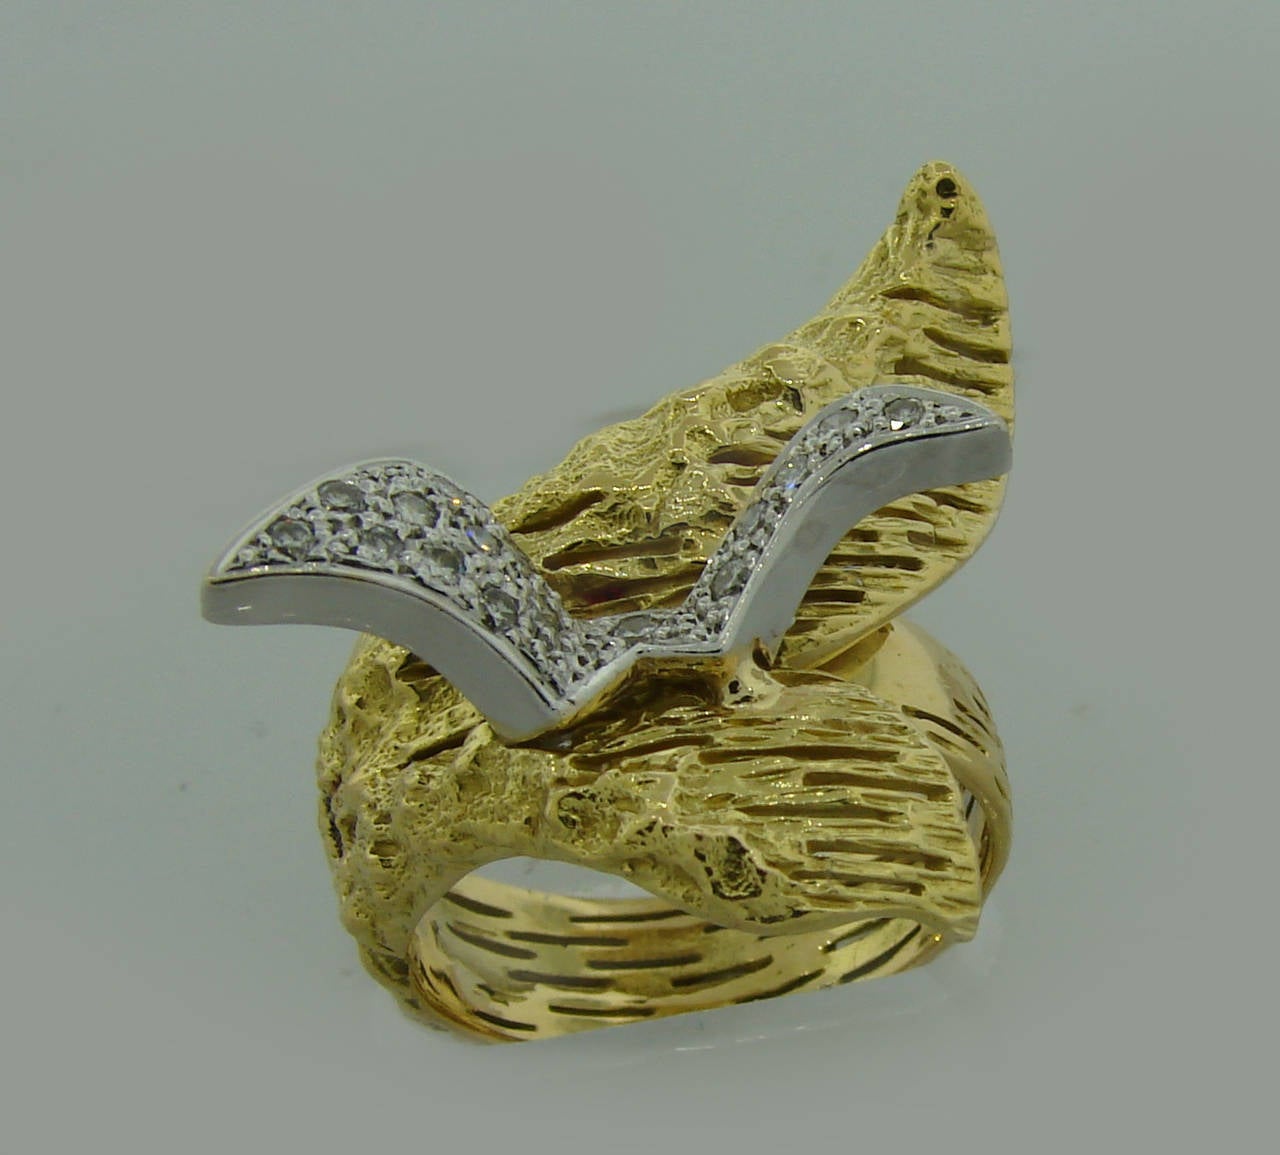 Unique collectable ring created in 1963 by the famous French artist, painter and sculptor Georges Braque. The ring is called DIONE and described on page 68 of the book "Les Metamorphoses de Braque" by Heger de Loewenfeld and Raphael de